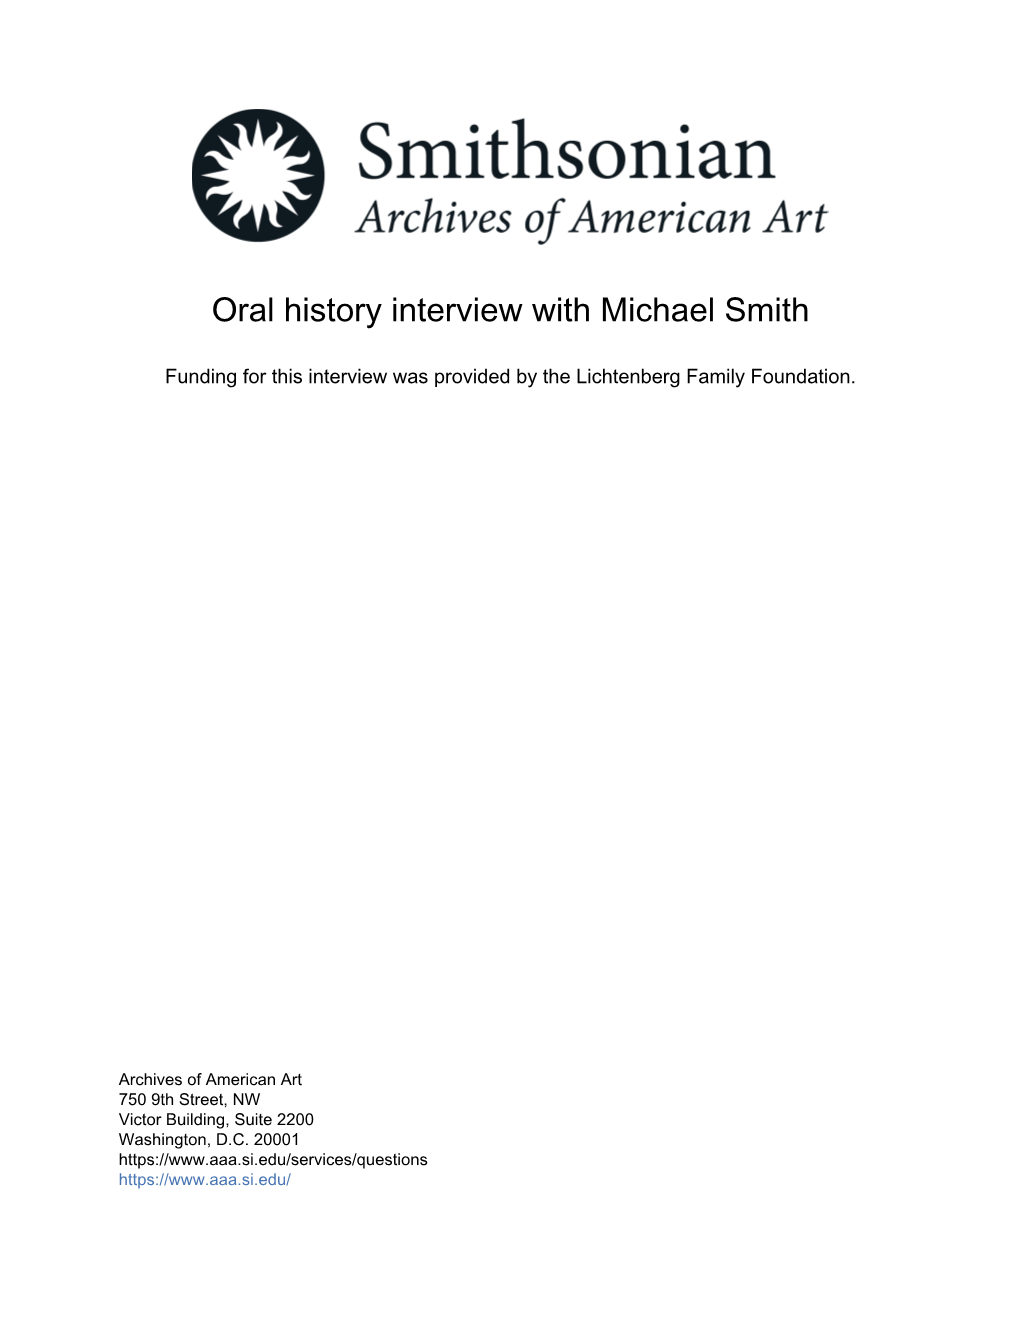 Oral History Interview with Michael Smith